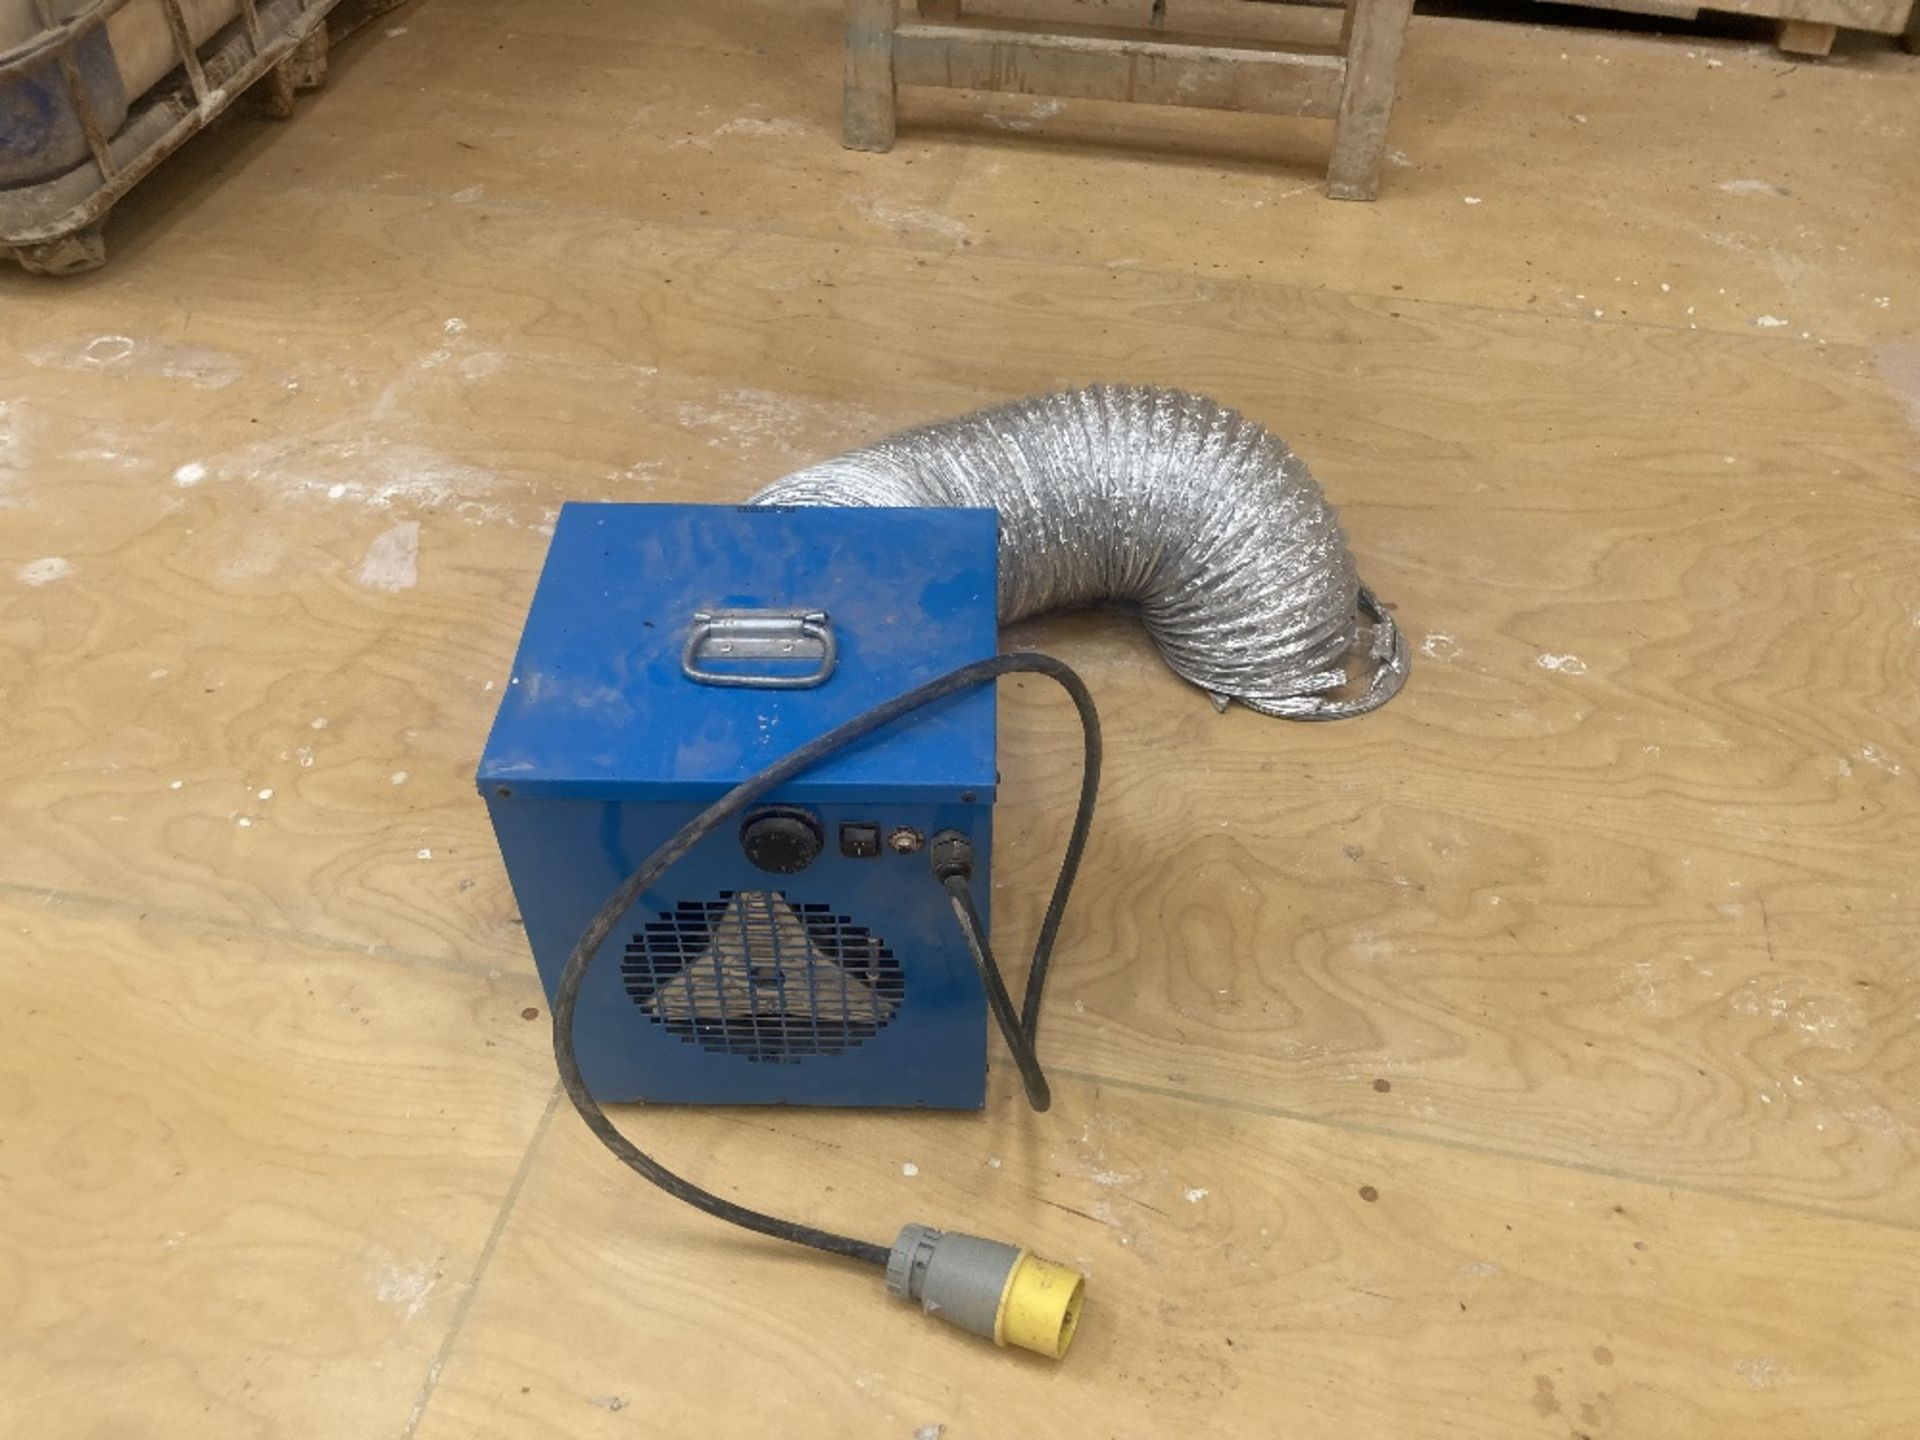 Broughton 110v Industrial Fan Heater With Ducting - Image 3 of 5